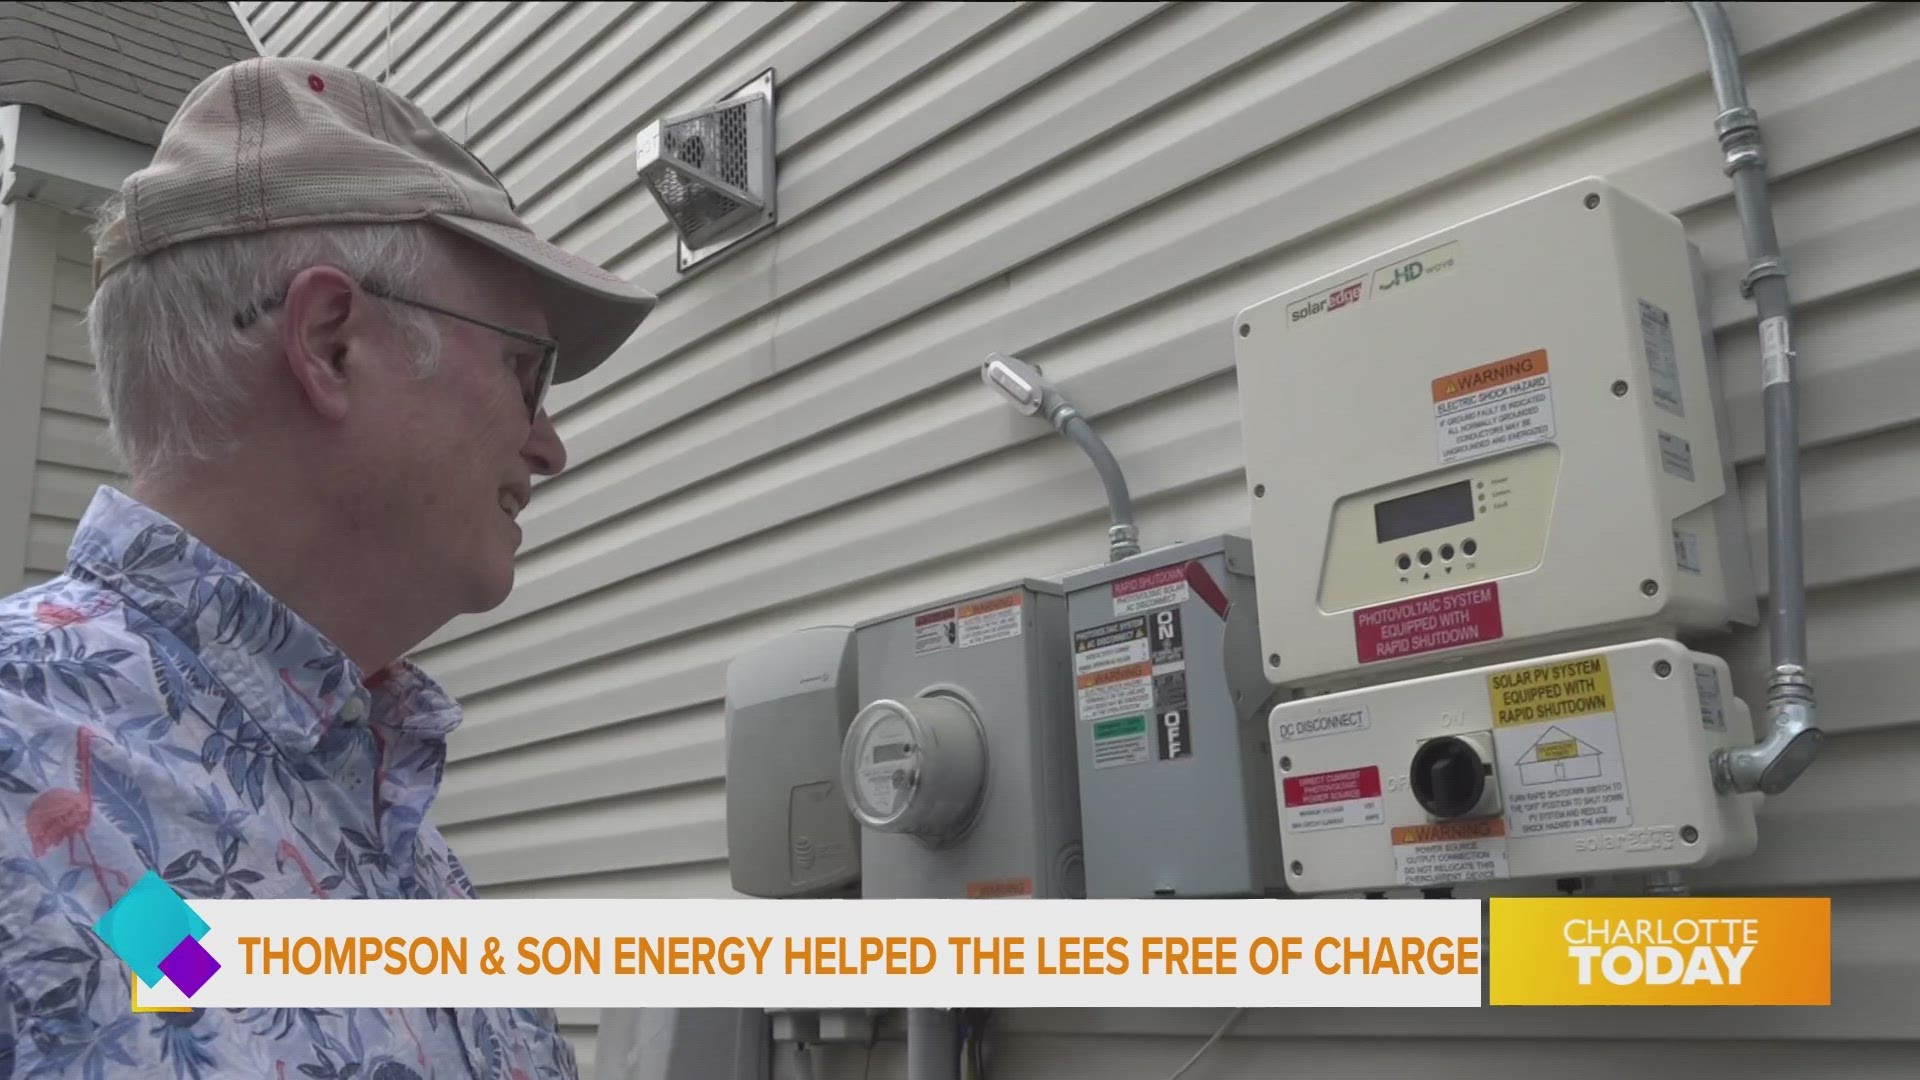 Thompson & Son Energy Solutions can help support homeowners in need